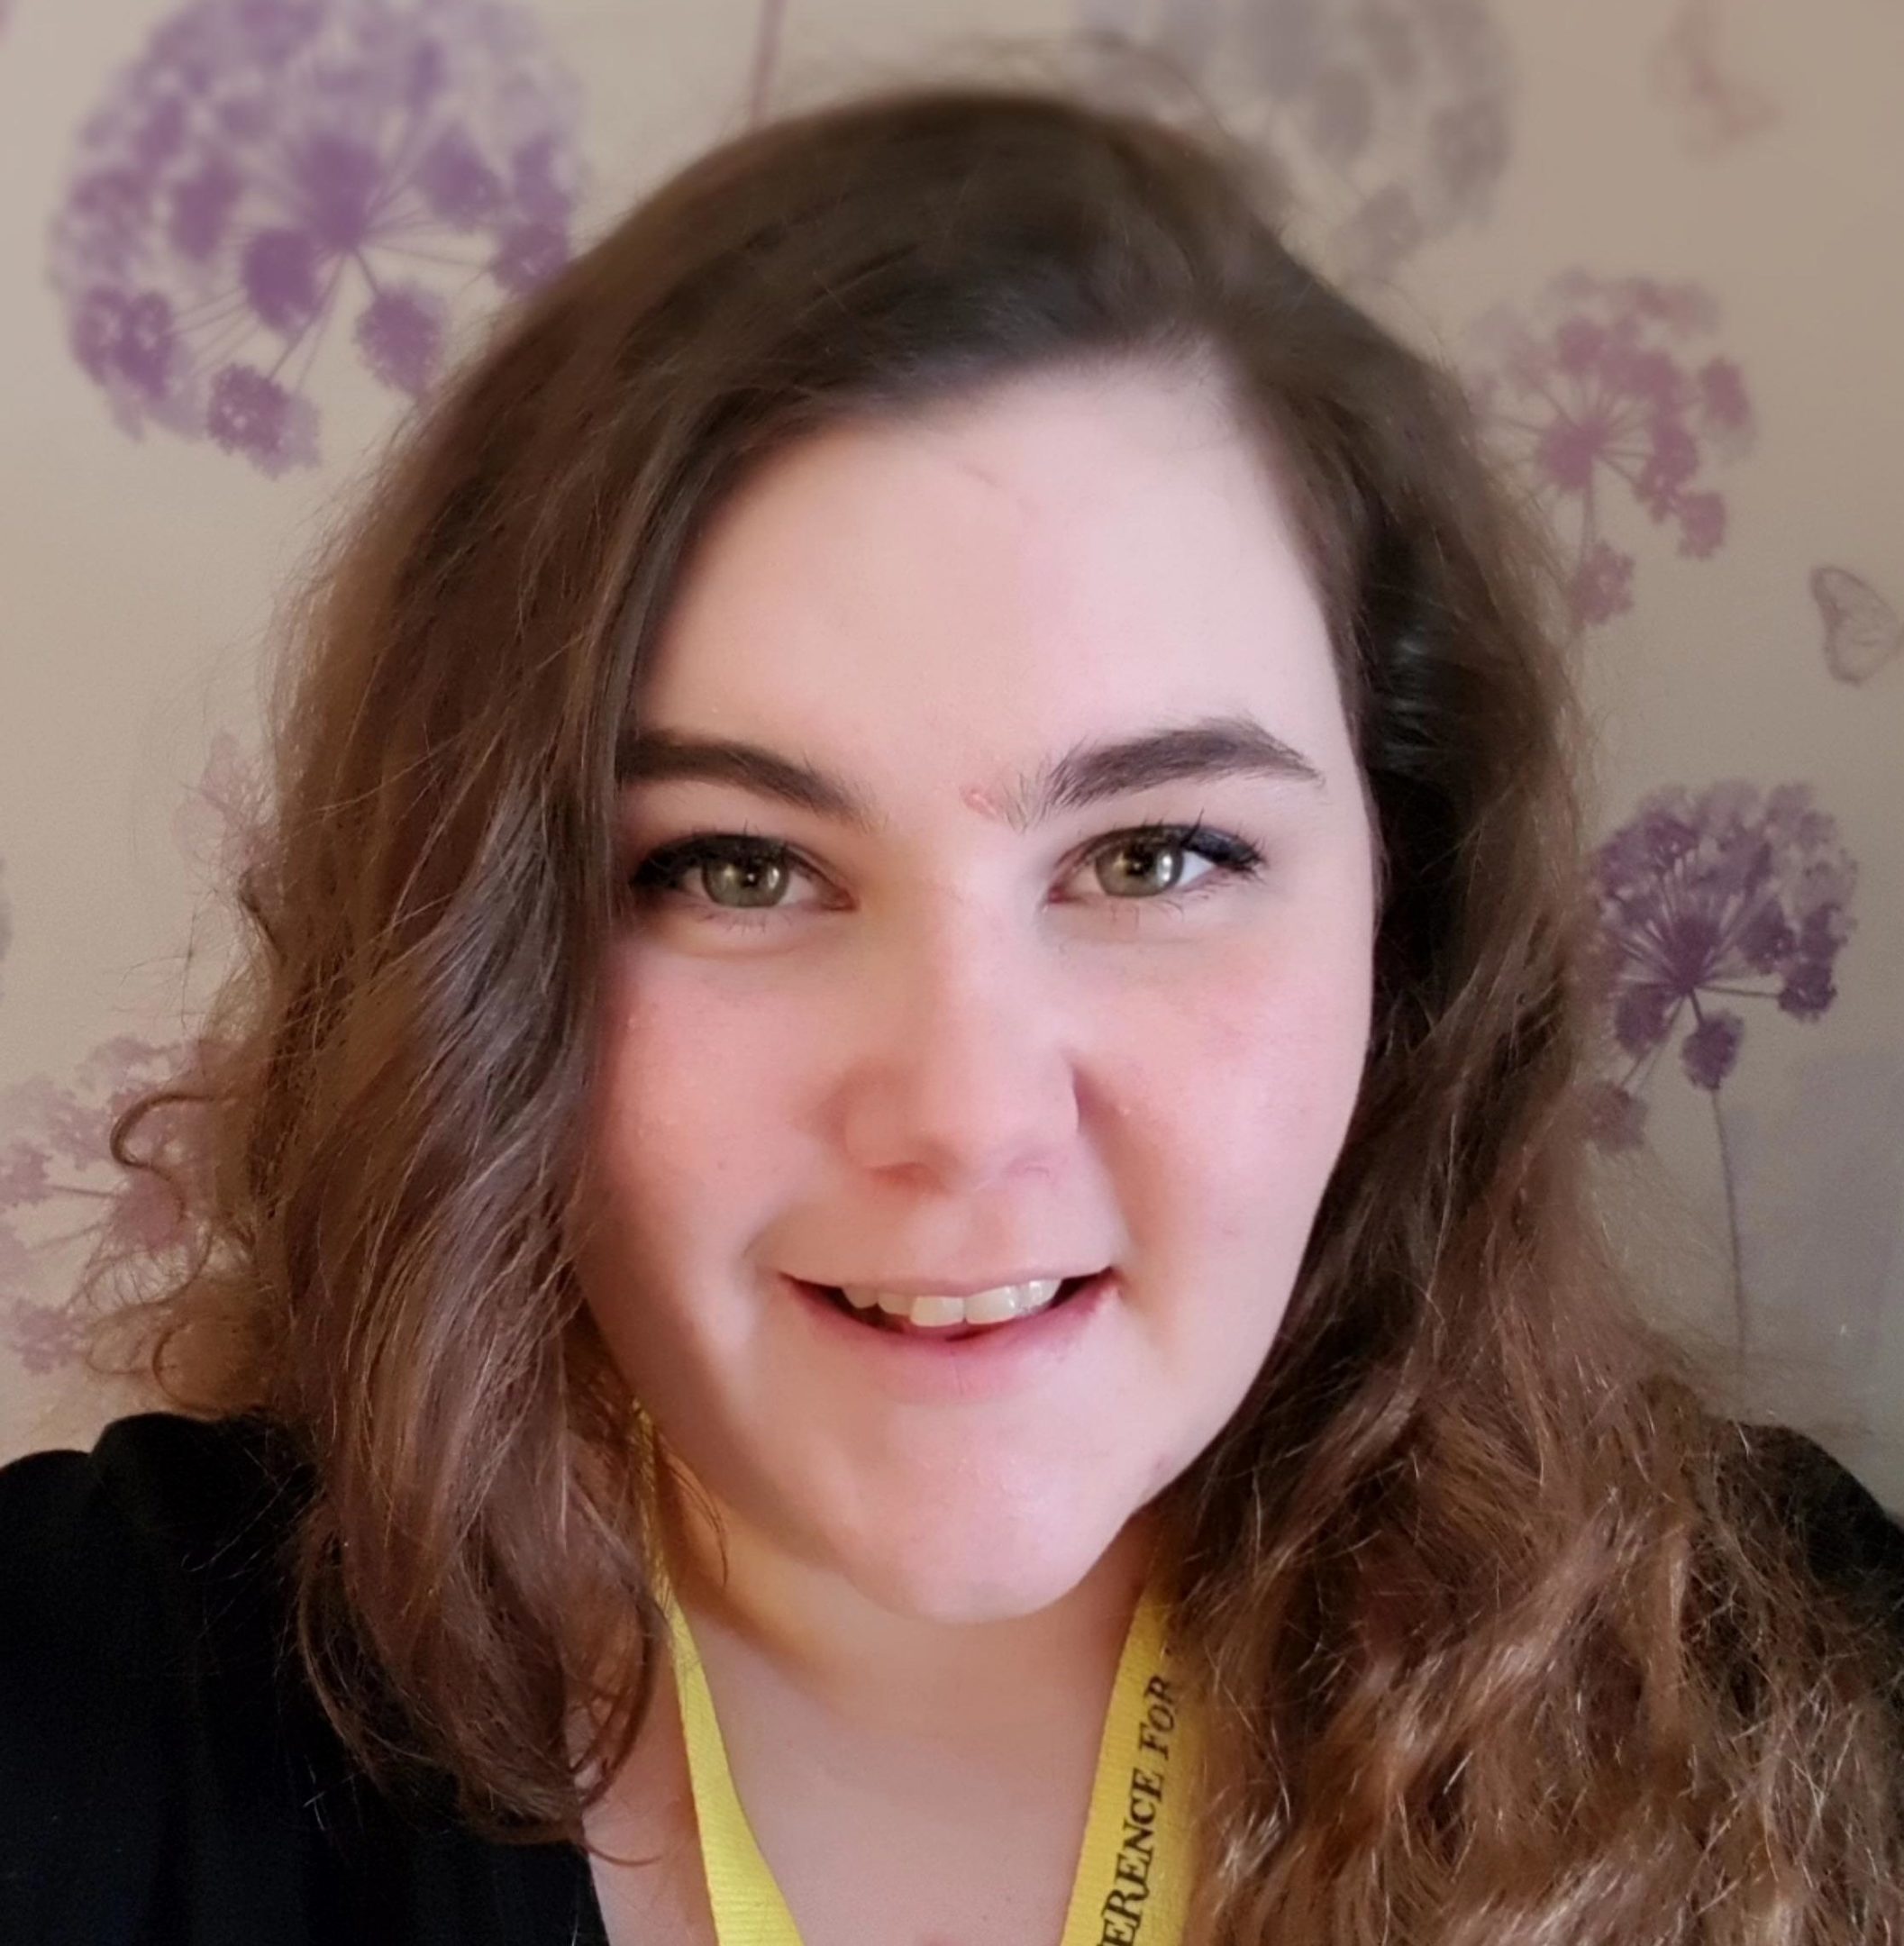 Emma Legdon reflects on her time as a Digital Applications apprentice with inspirational Aberdeen-based children’s hospital charity.